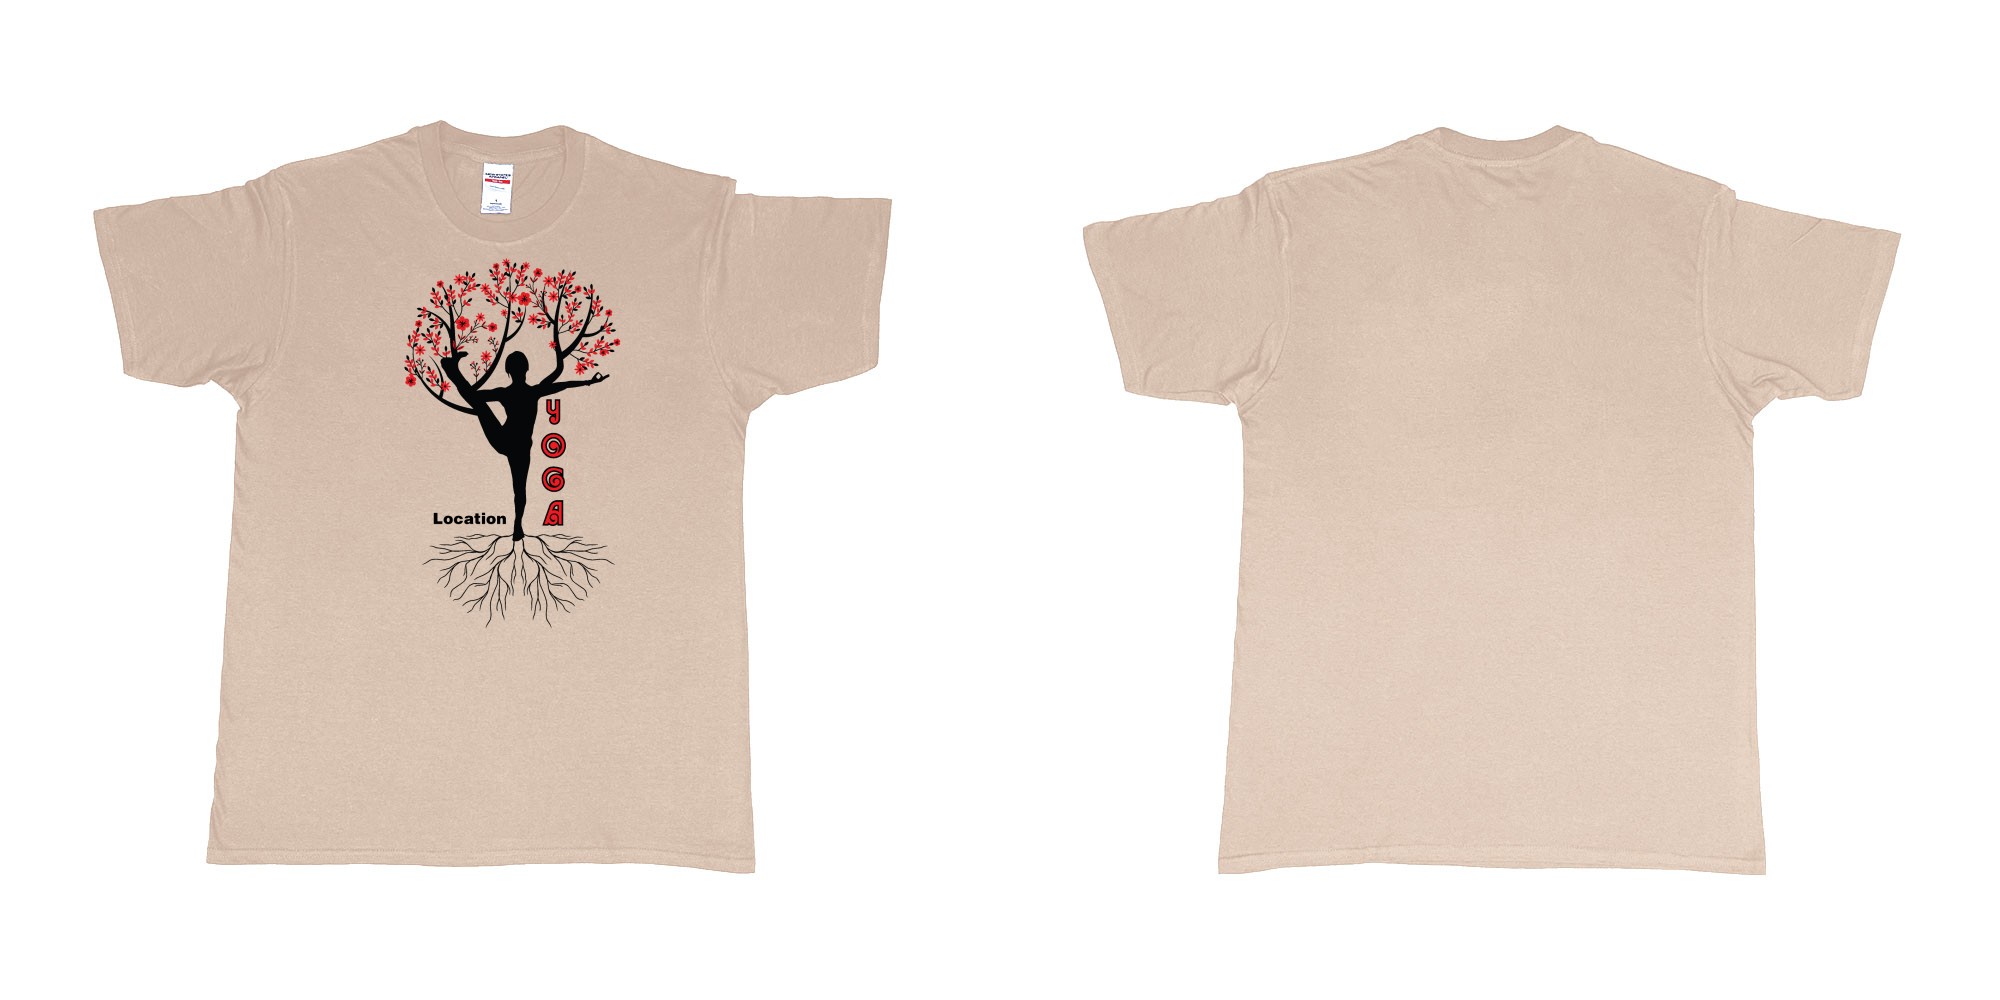 Custom tshirt design yoga tree of life is blooming own logo location design in fabric color sand choice your own text made in Bali by The Pirate Way